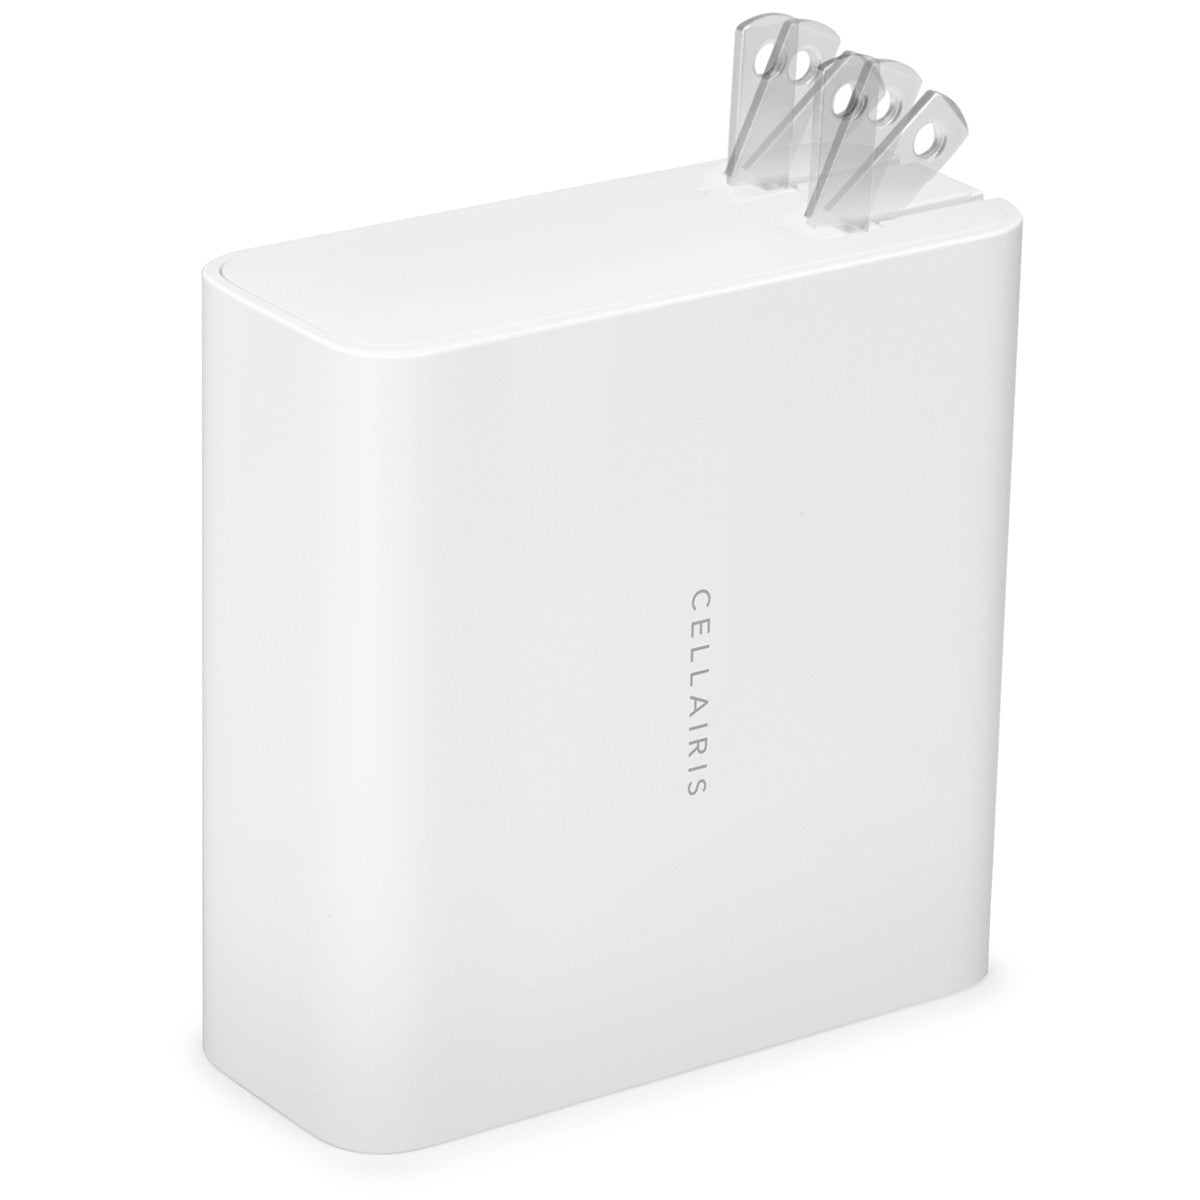 Cellairis Macbook & Laptop Charger Single USB-C 140W w/ 6ft USB-C Cable White Wall Chargers